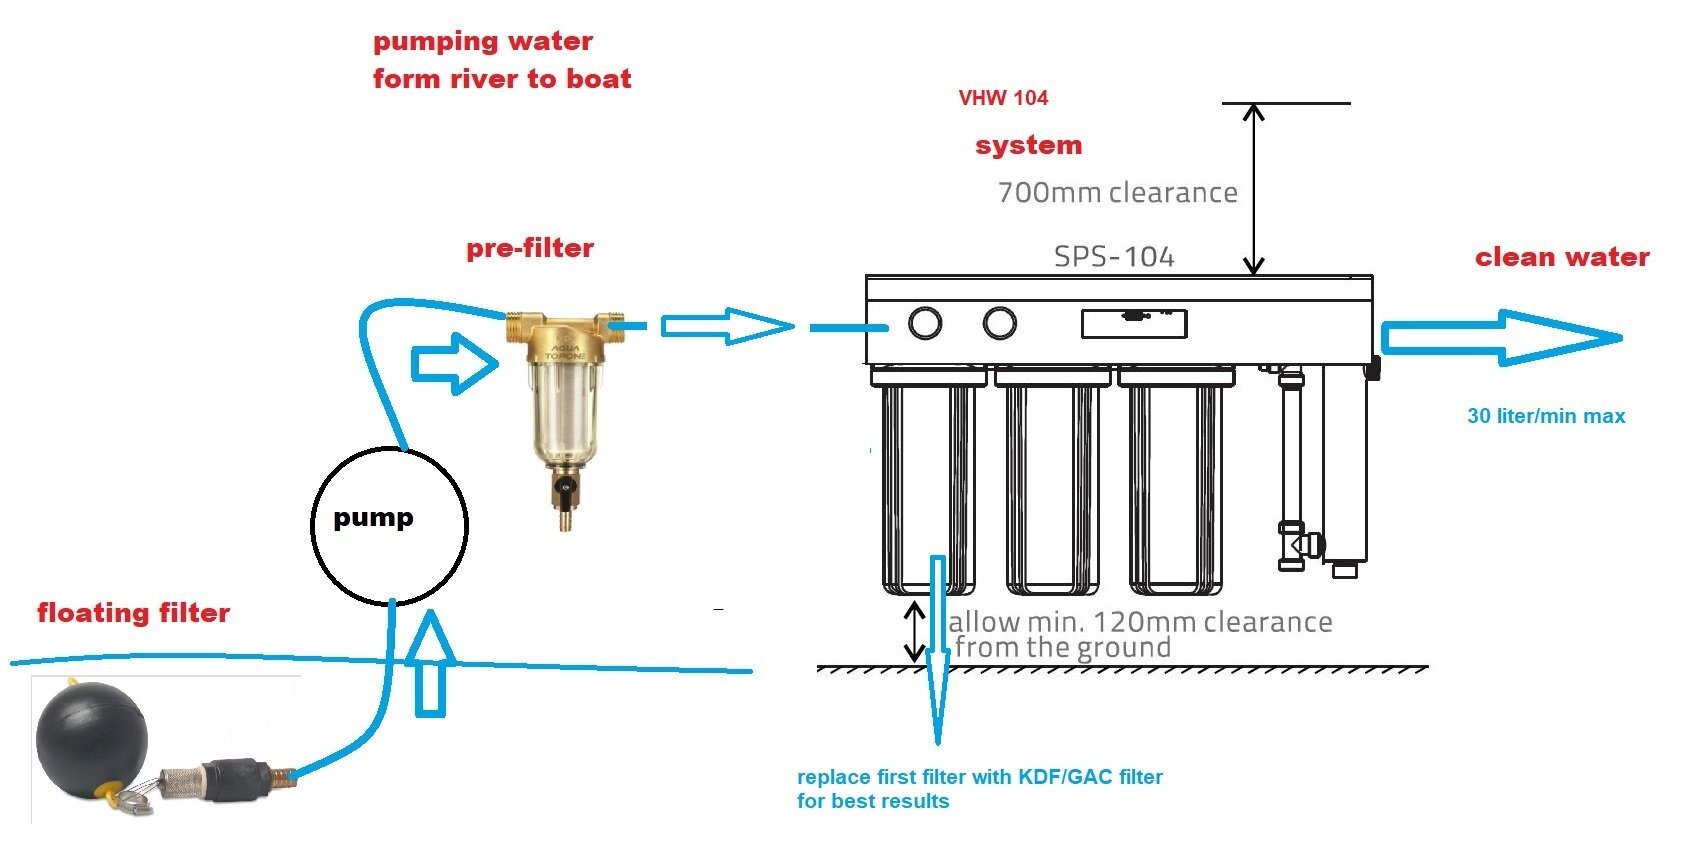 Water filter, floating filter that helps our systems stay cleaner preventively